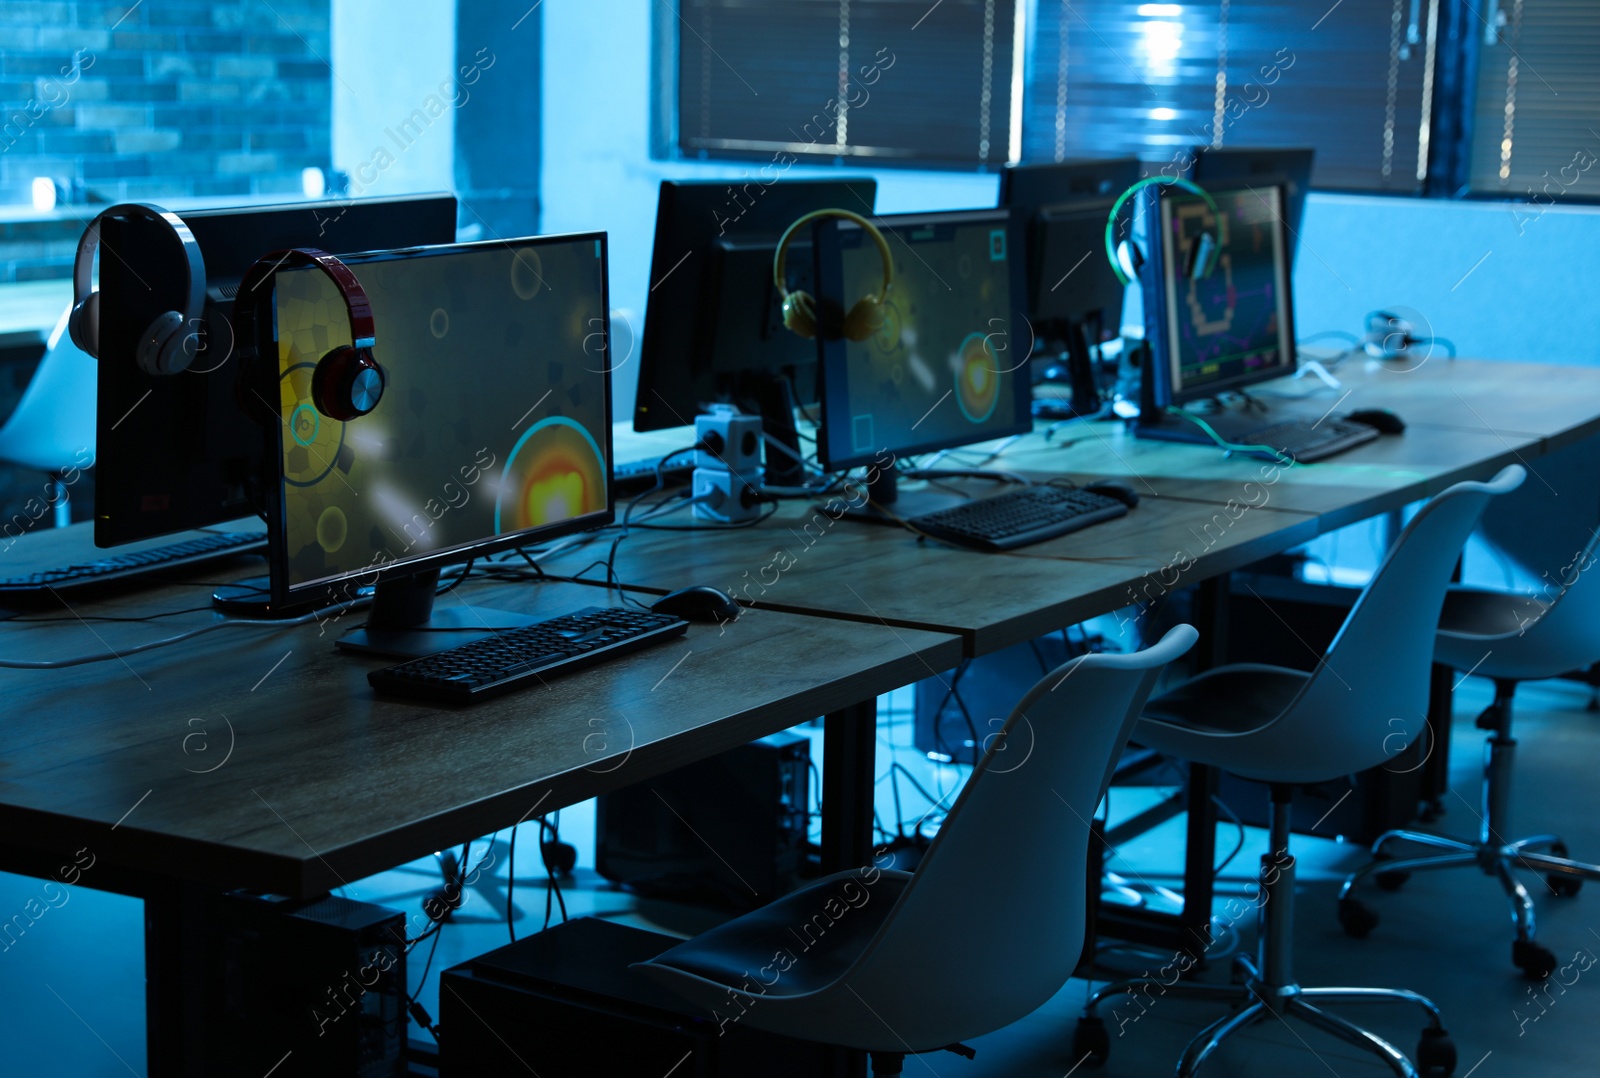 Photo of Internet cafe interior with modern computers. Video game tournament